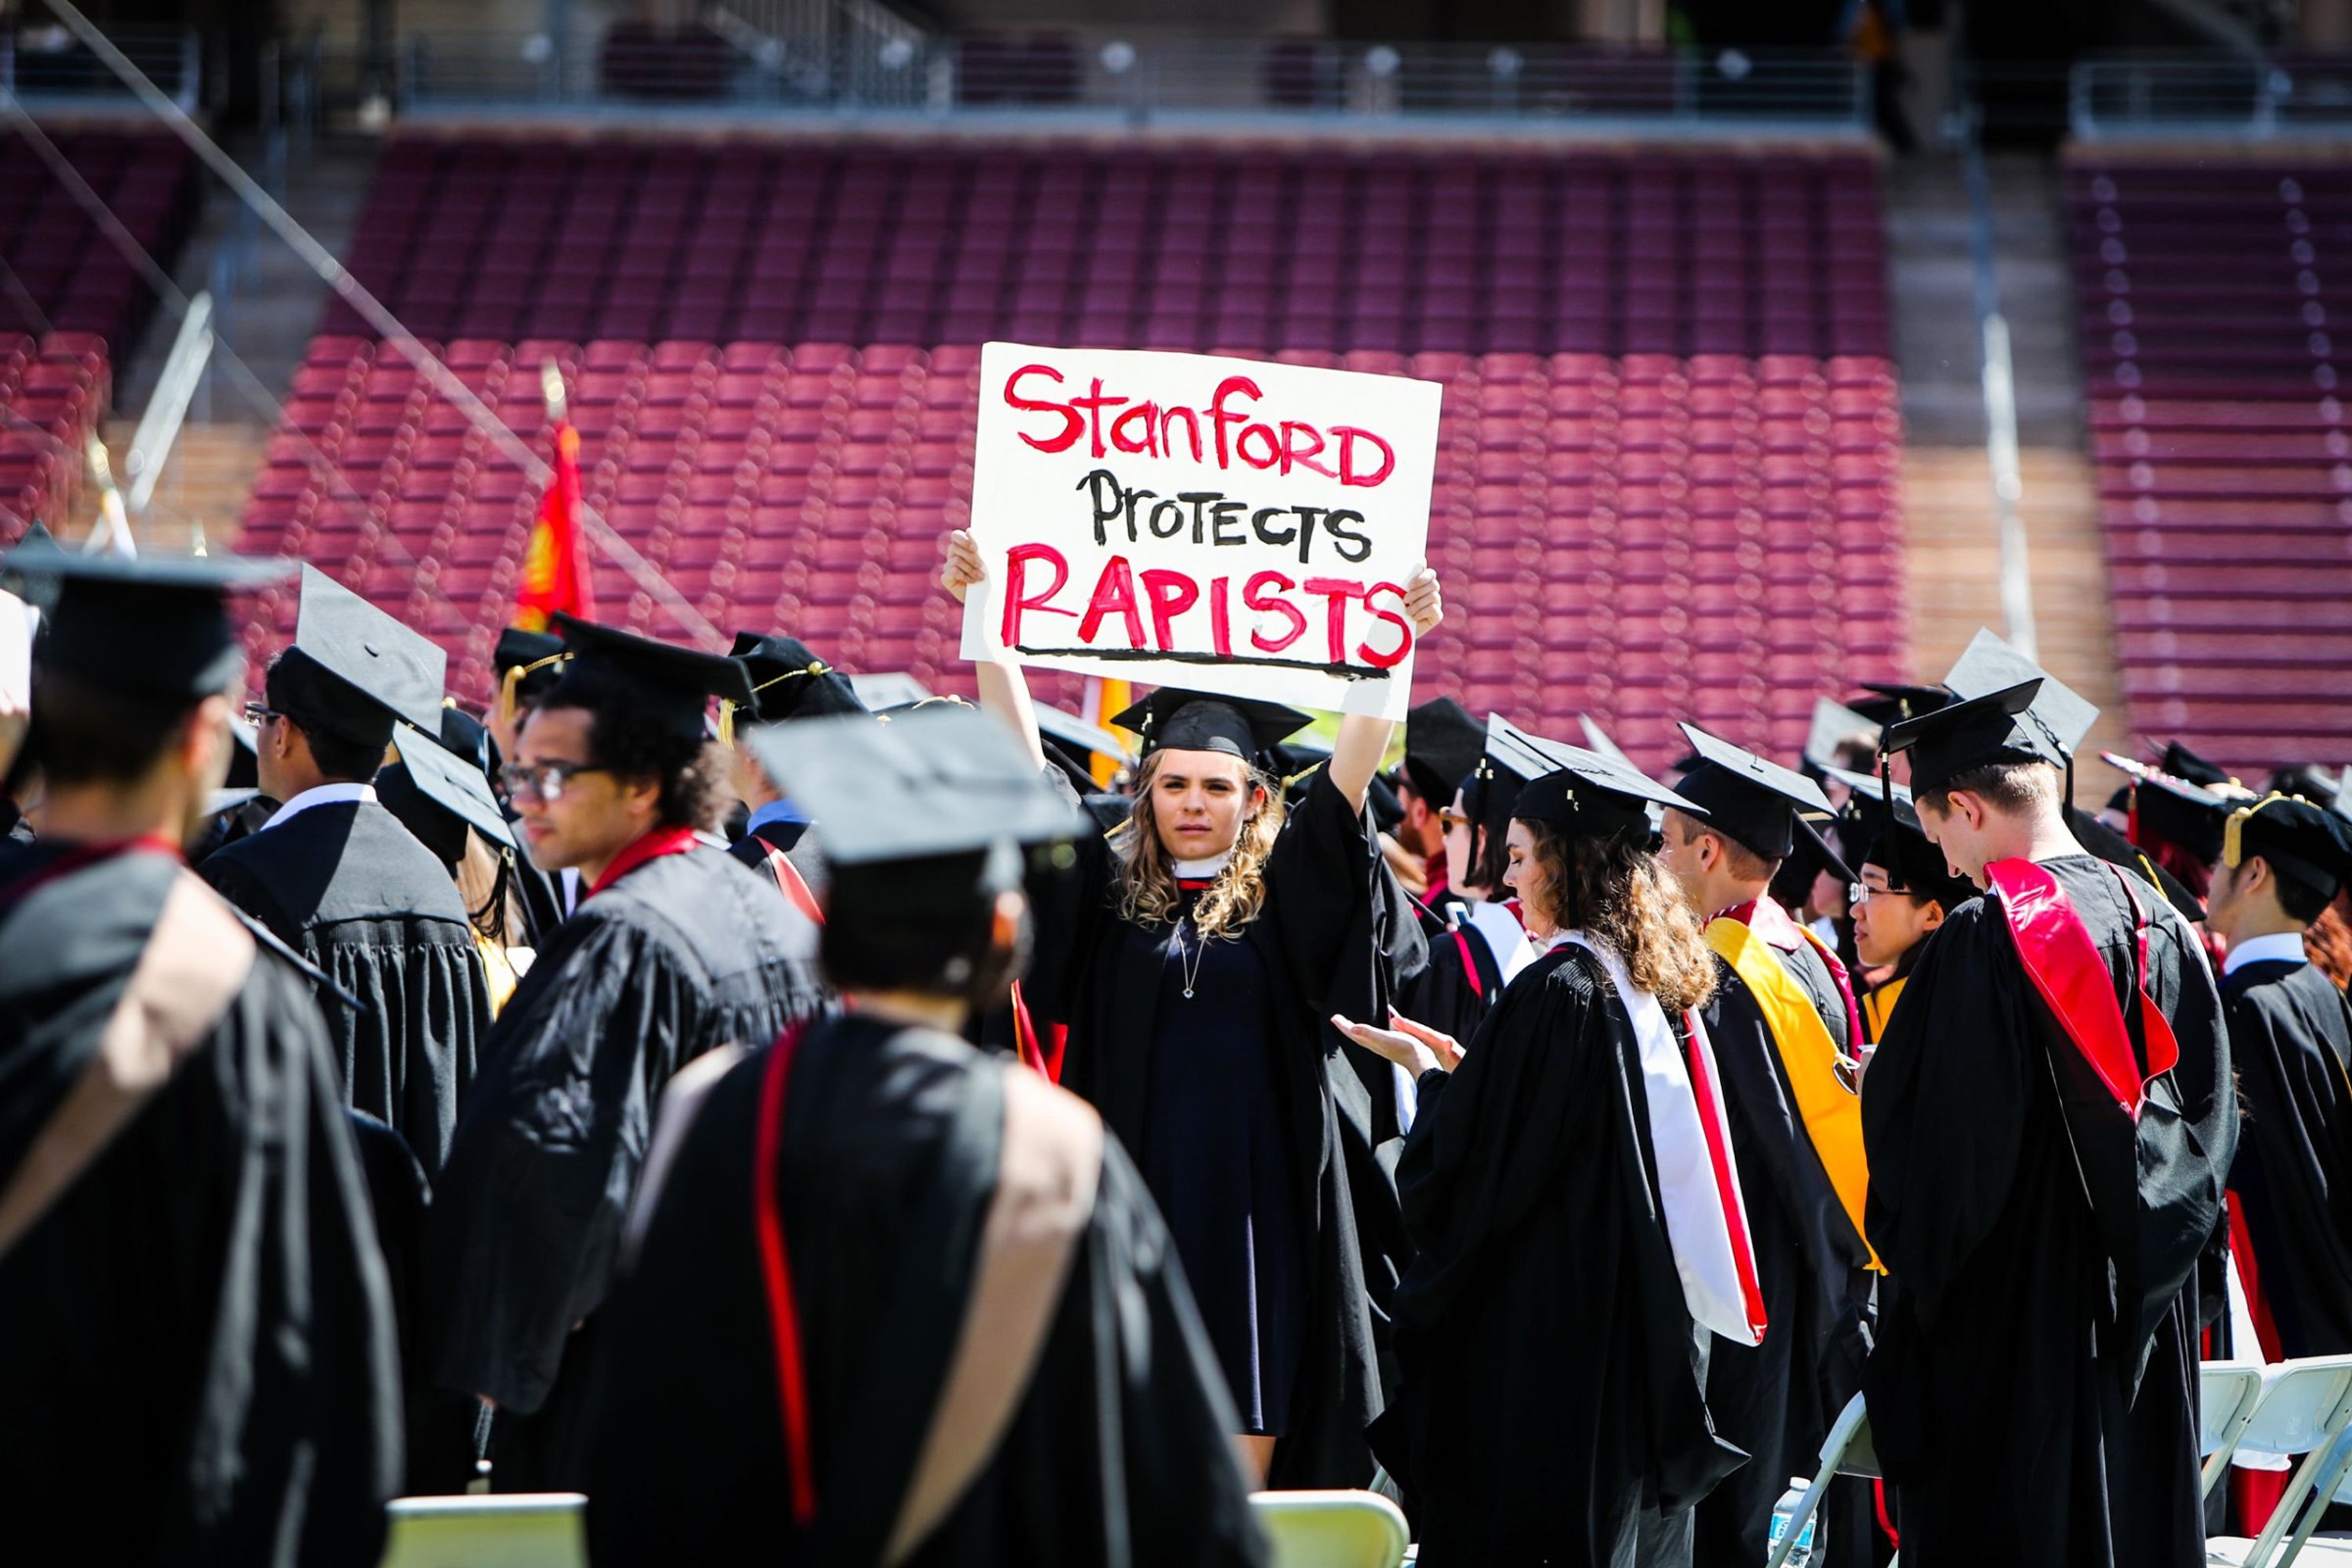 A woman carries a sign in solidarity for a Stanford rape victim during graduation at Stanford University, in Palo Alto, Calif. on June 12, 2016.